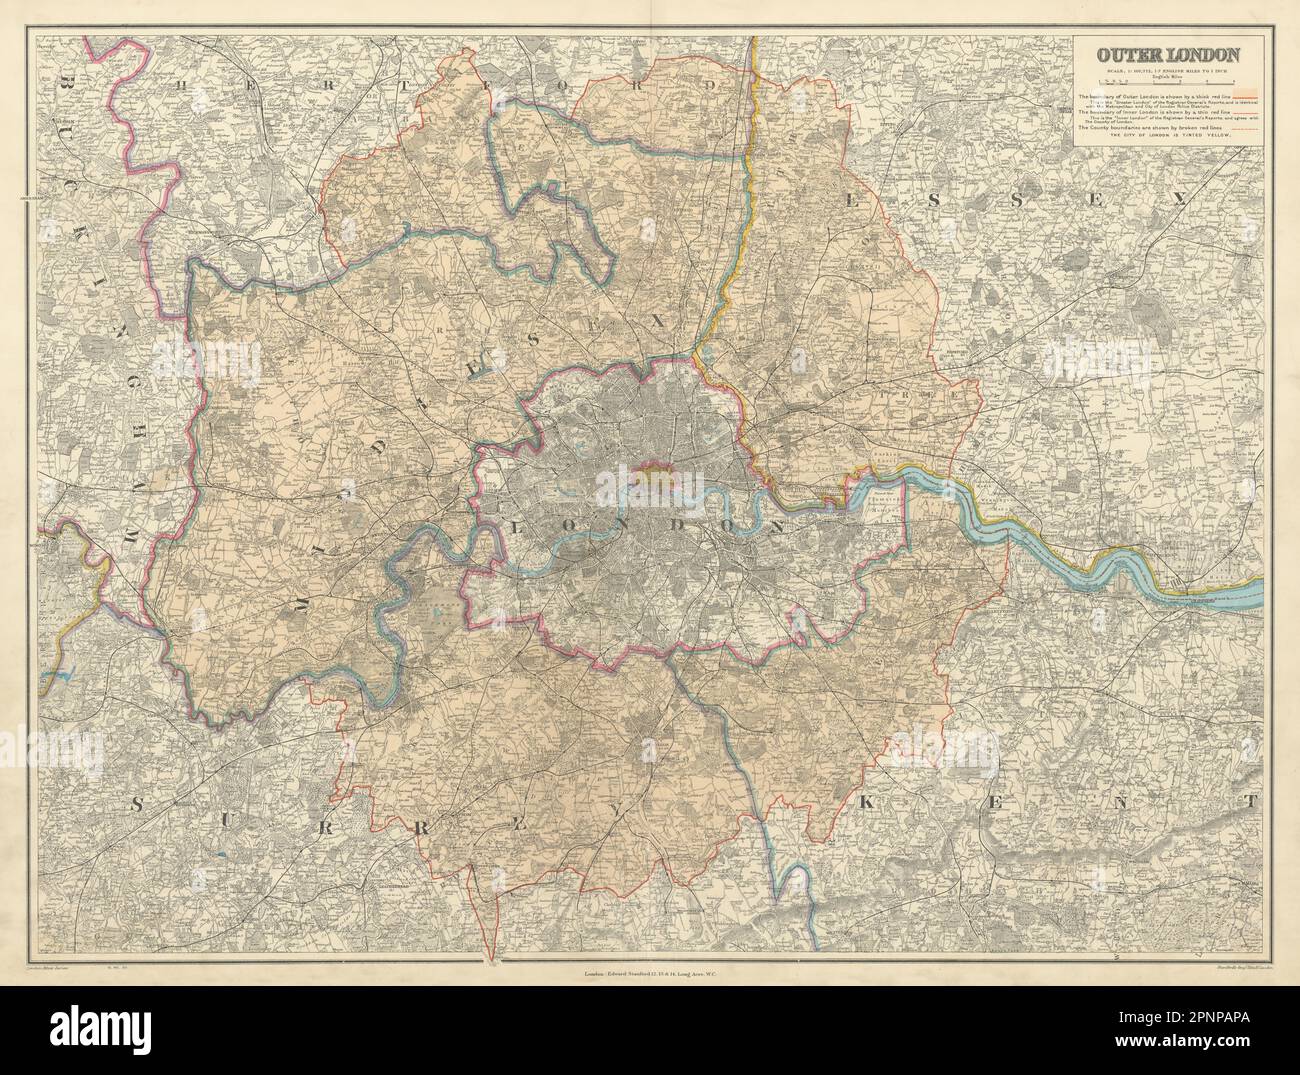 Outer [Greater] London. Metropolitan Police Area. 54x72cm. STANFORD 1904 map Stock Photo